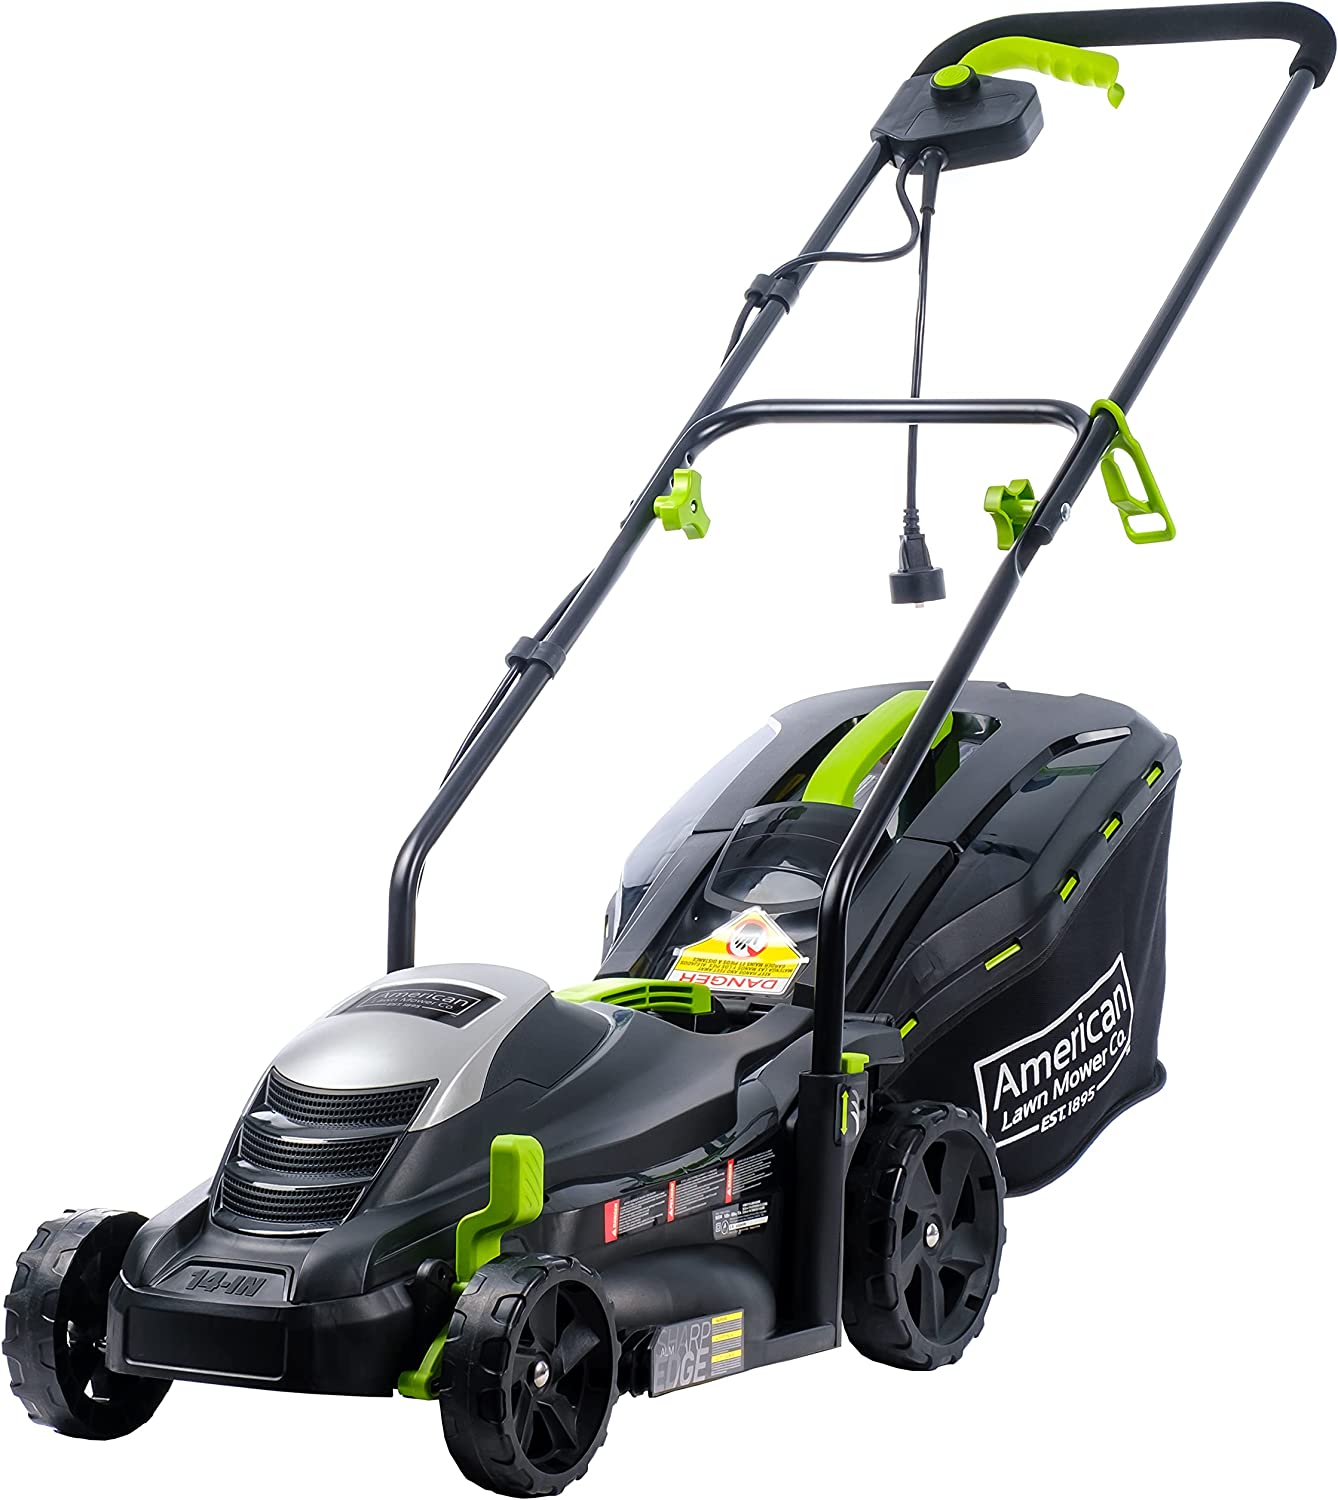 American Lawn Mower Company Corded Electric Lawn Mower – Just $113.08 at Amazon